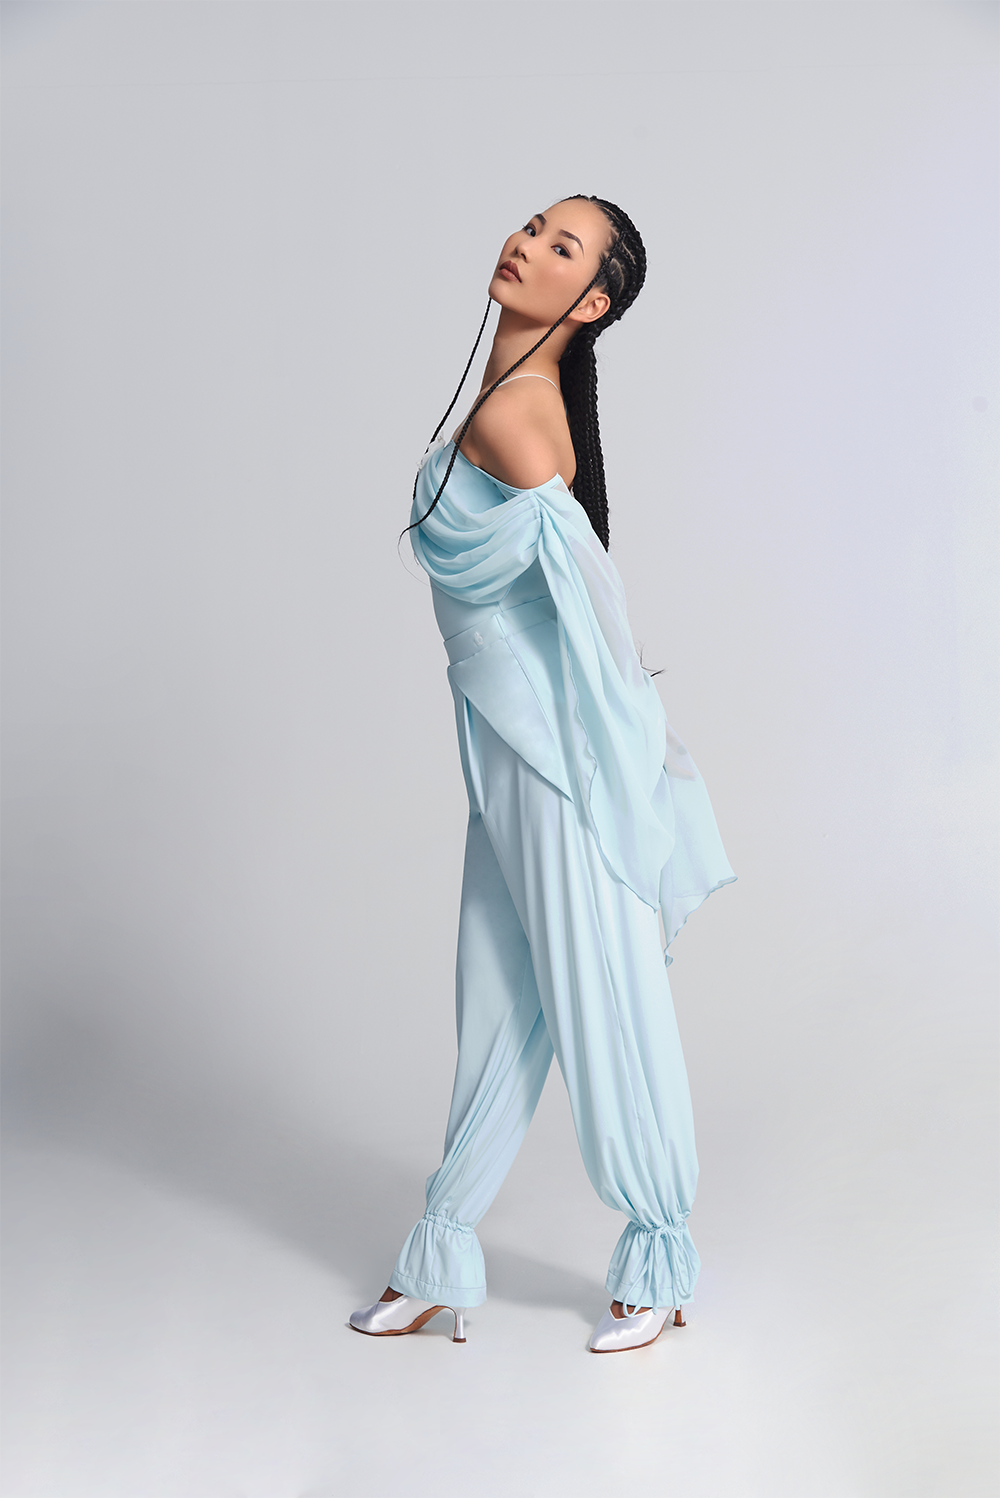 This DANCE QUEEN 715-2 leotard in Glacier Blue combines elegance and functionality. Its off-shoulder design is both stylish and comfortable, while the flower ribbon details add a touch of femininity. Made with premium materials, this leotard provides maximum flexibility and support for dancers.